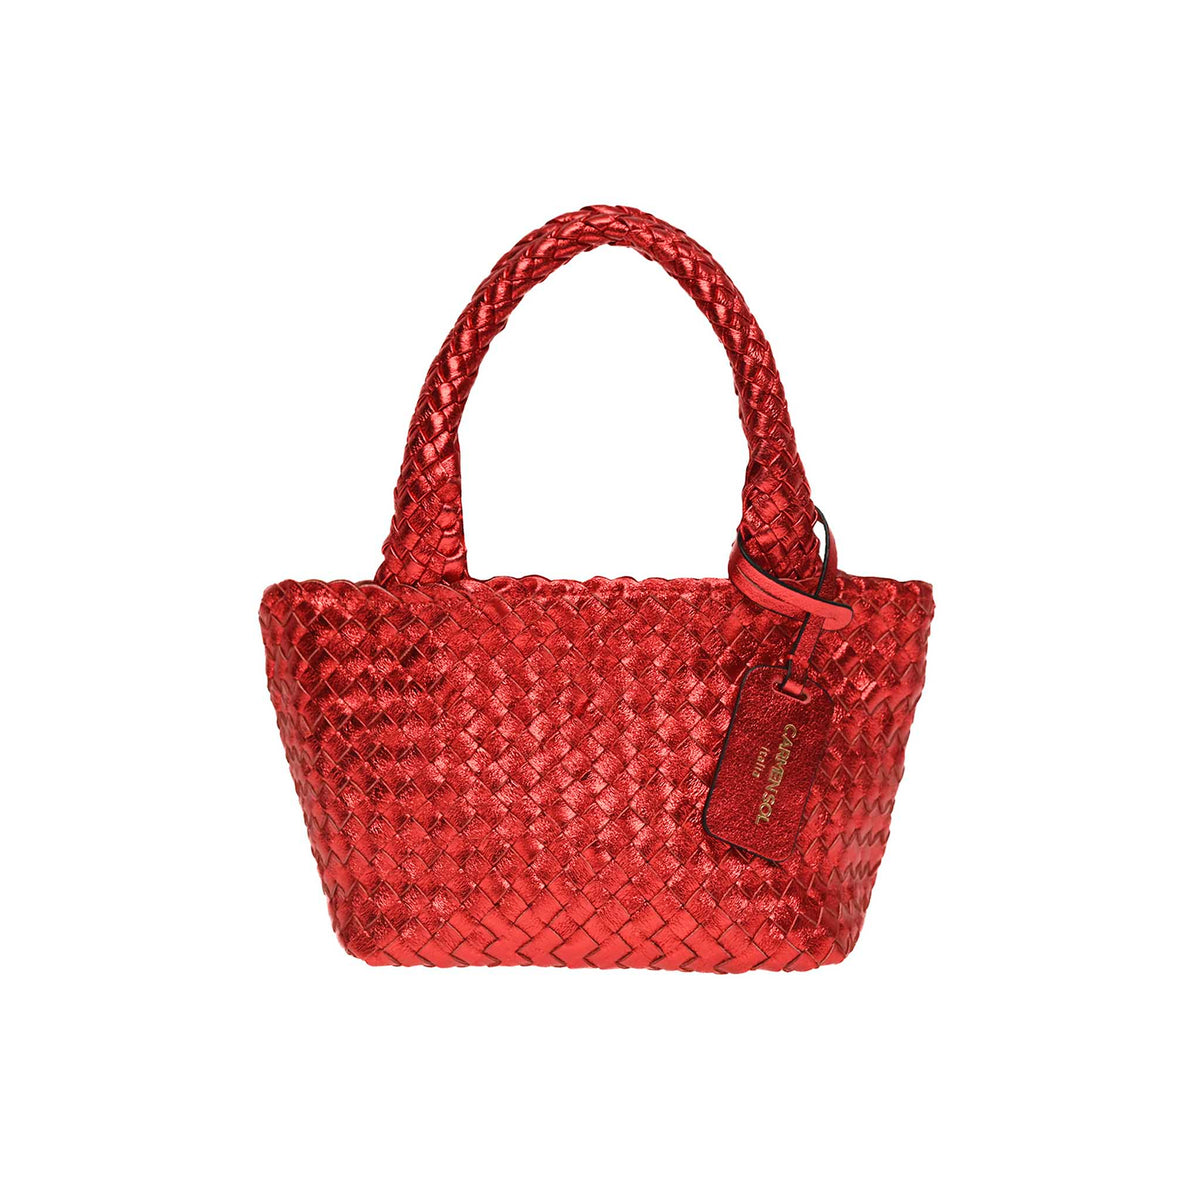 Red mini tote bag made in Italy attracts shopping and beach lovers.